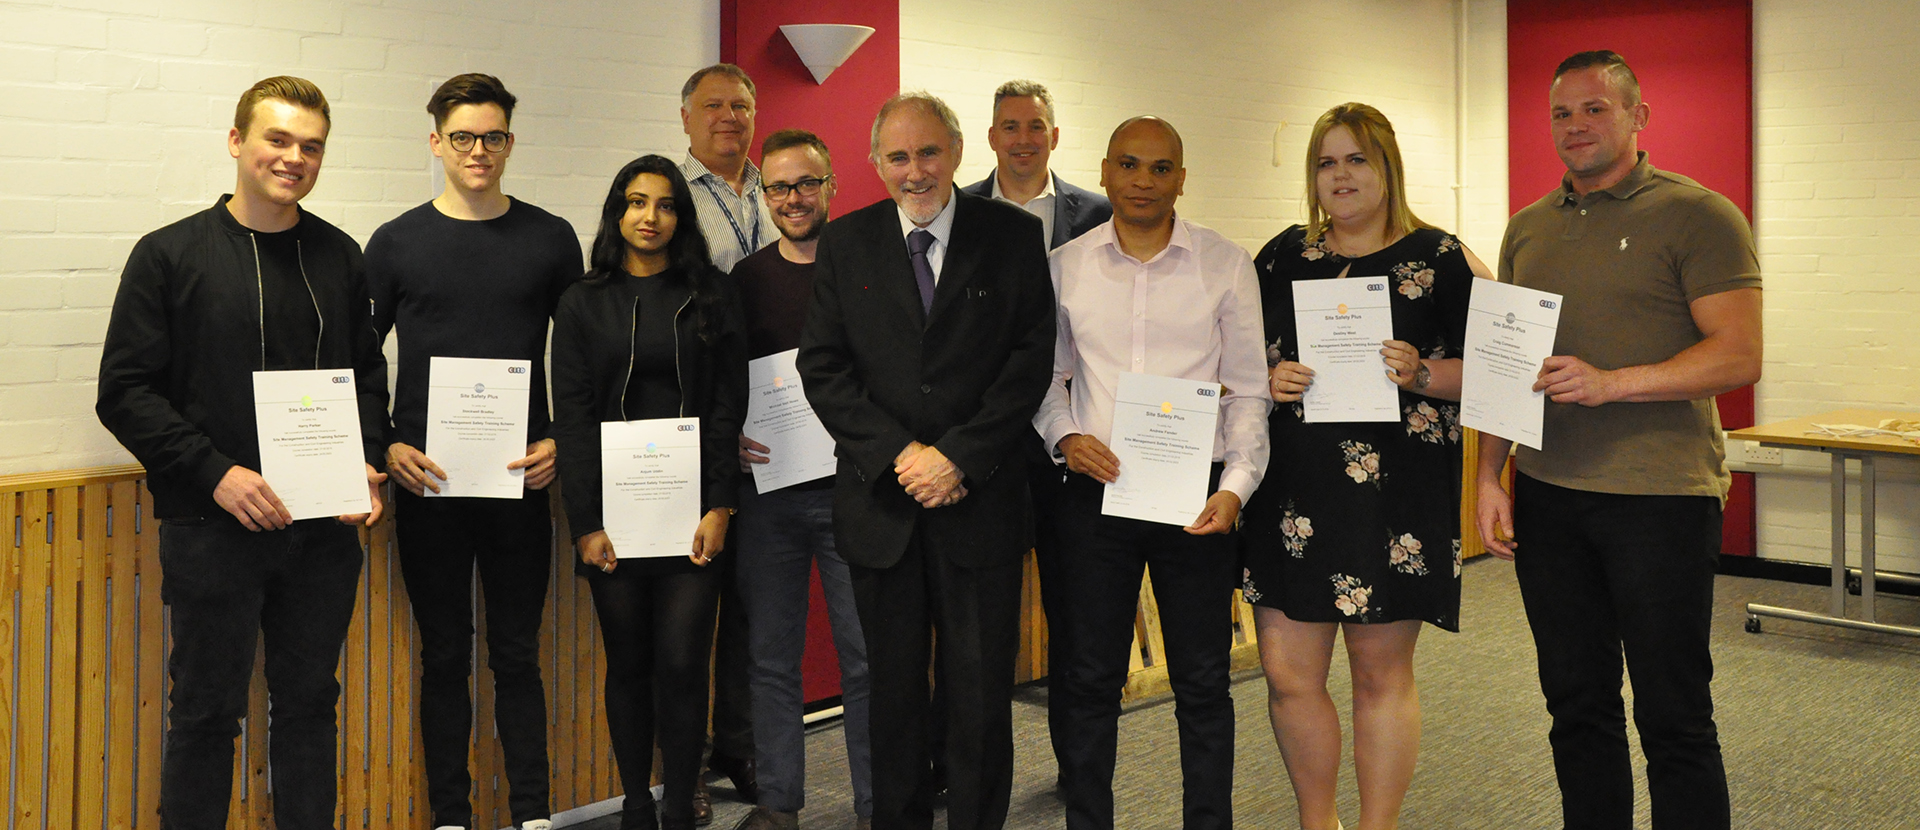 Construction Management students with CITB Site Manager Safety Training Scheme certificates